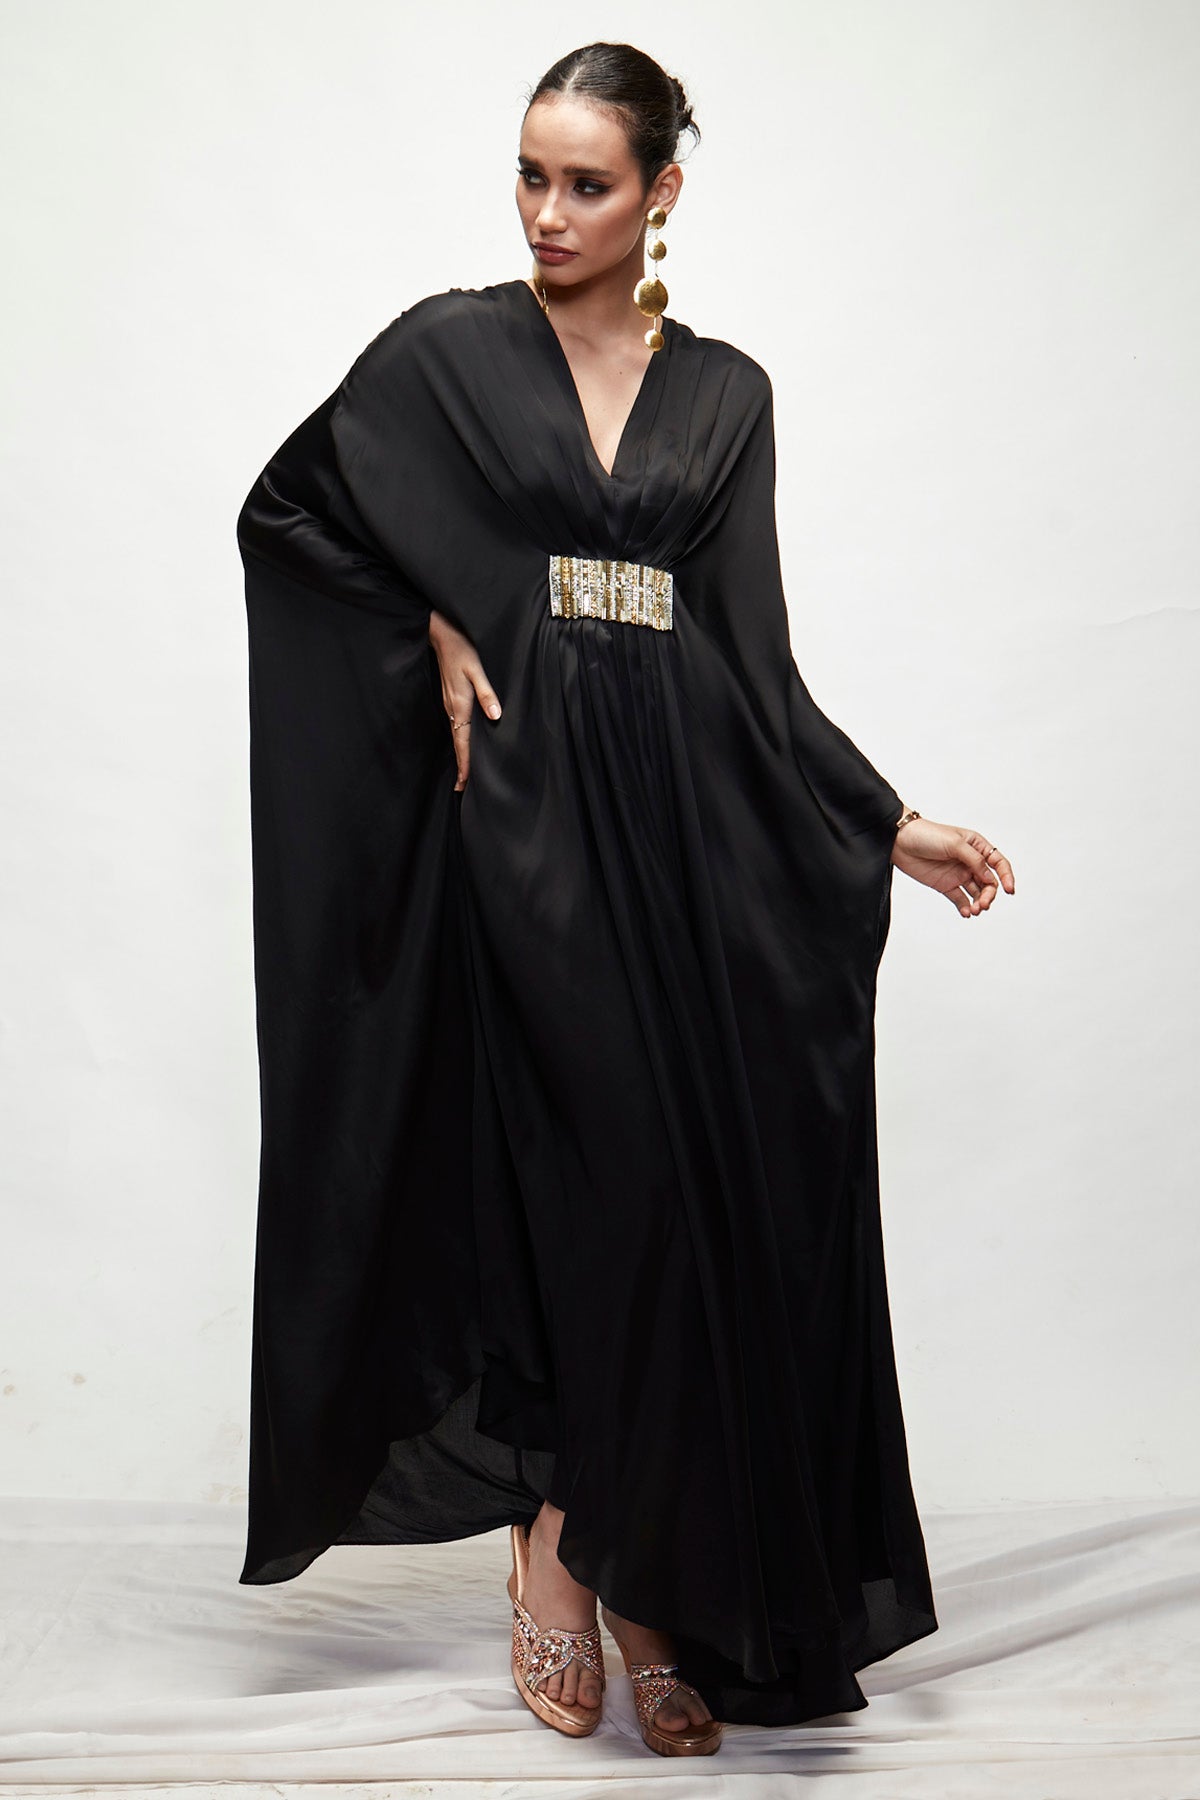 Designer Ranian Black silk kaftan with front pleat detailing and beads embroidery For women Online at ScrollnShops